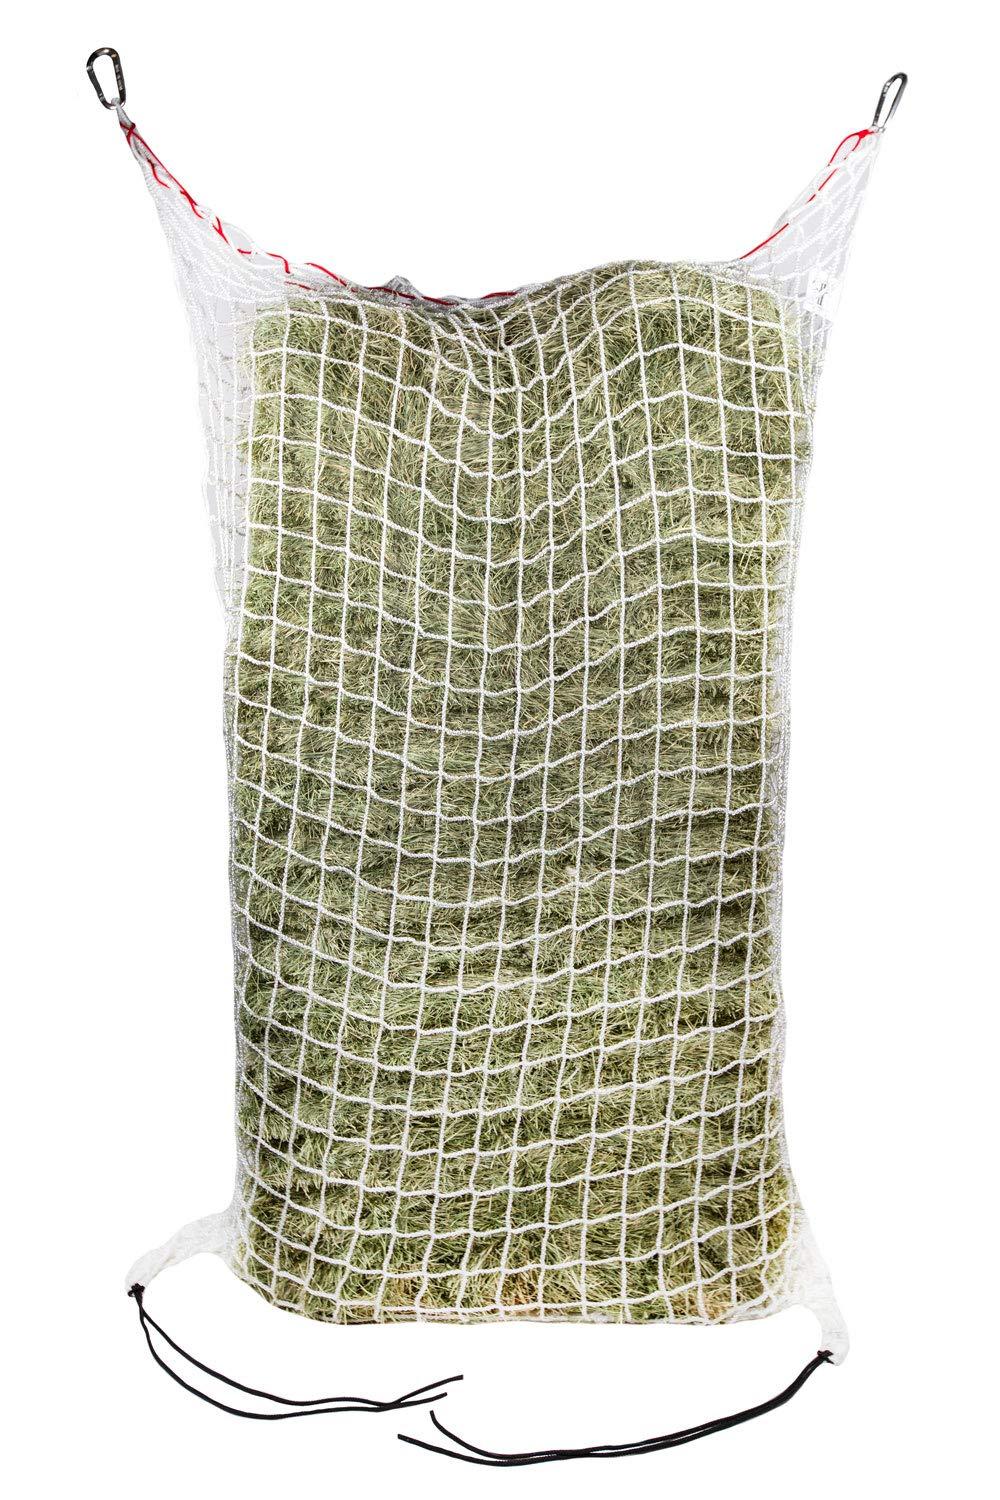 Freedom Feeder Mesh Net Full Bale Horse Feeder - Designed To Feed Horse For 7 Days - Reduce Horse Feeding Anxiety And Behavioral Issues